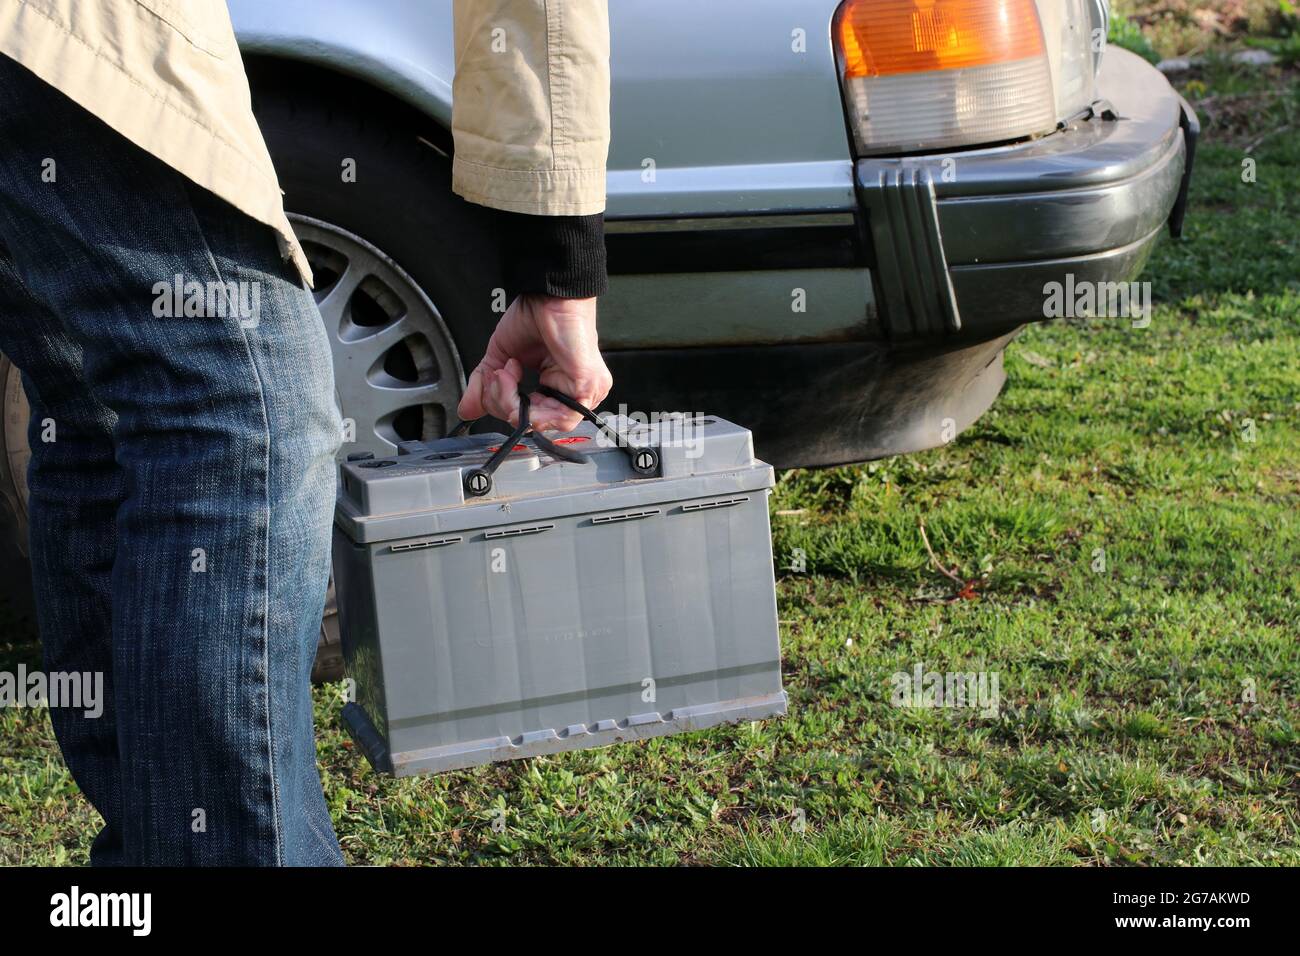 A woman carries a car battery for installation in a car. Stock Photo